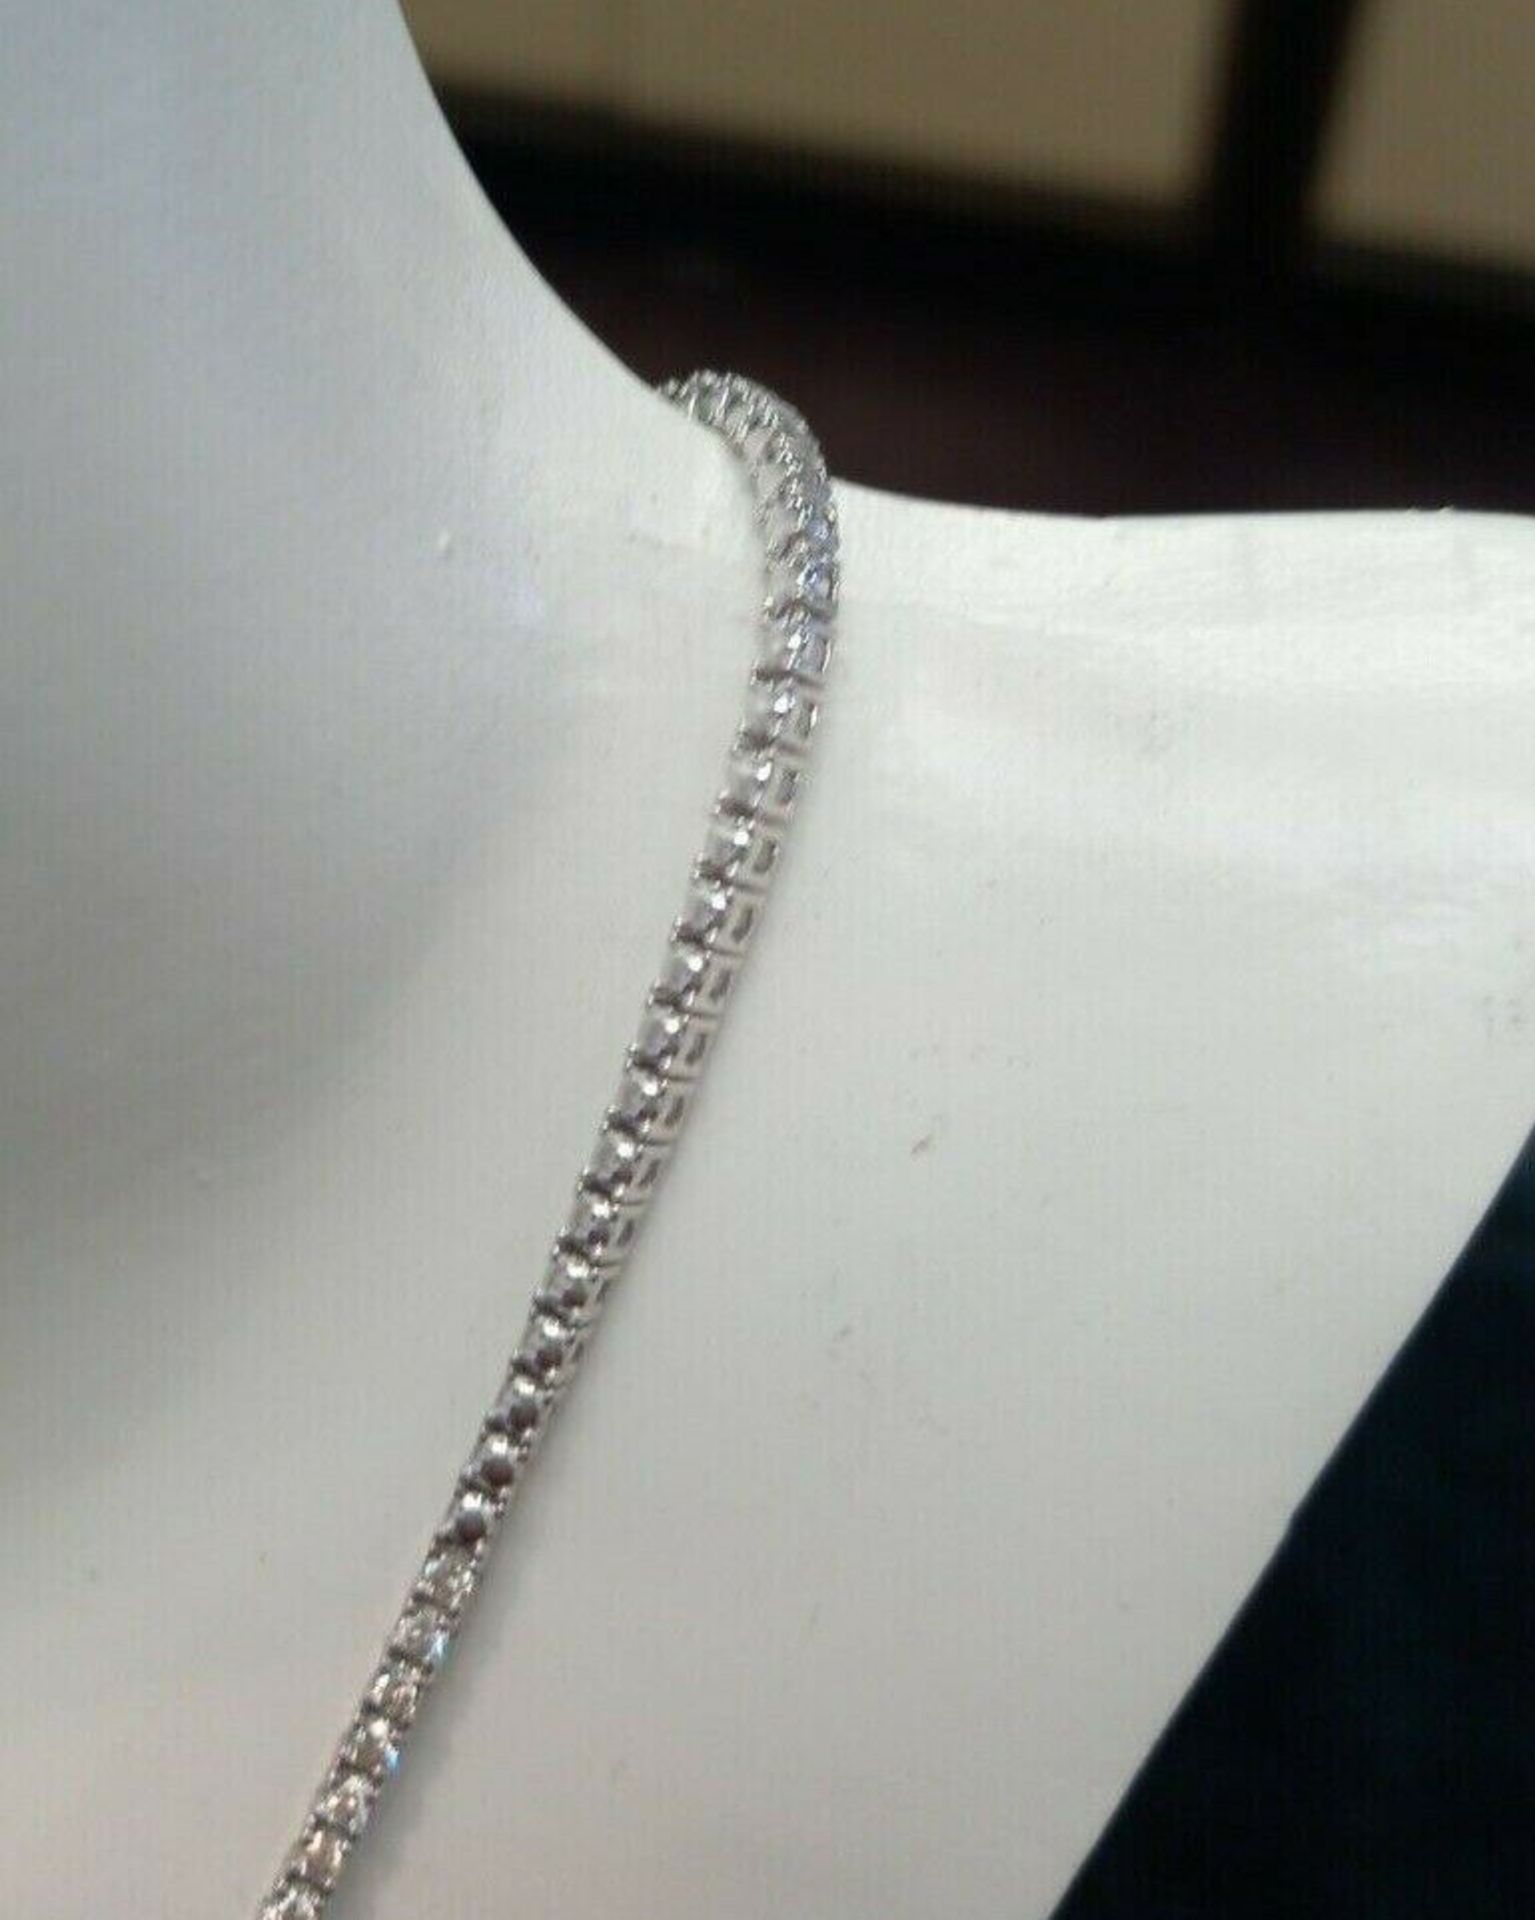 18CT WHITE GOLD GRADUATED 3/4 WAY 2.50 CARATS DIAMOND TENNIS NECK.ACES WITH VALUATION OF £7995 - Image 5 of 6